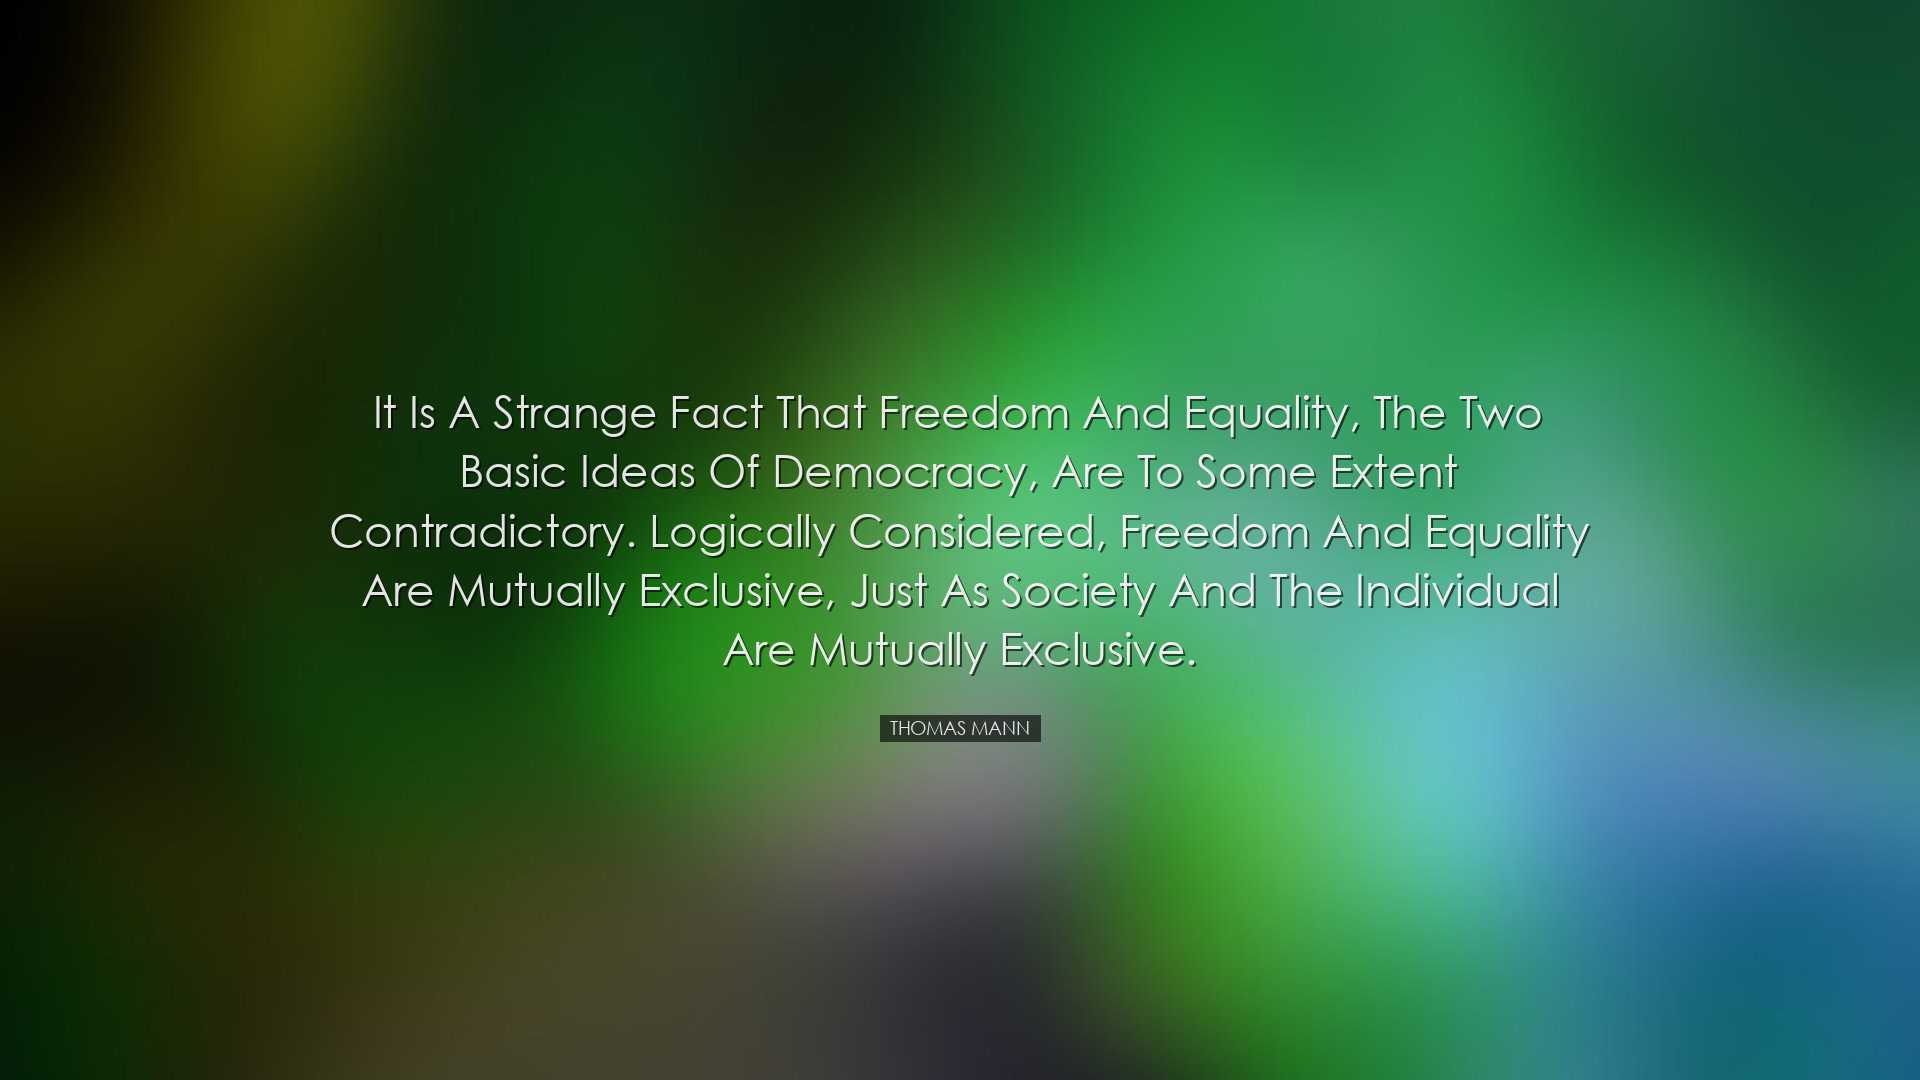 It is a strange fact that freedom and equality, the two basic idea